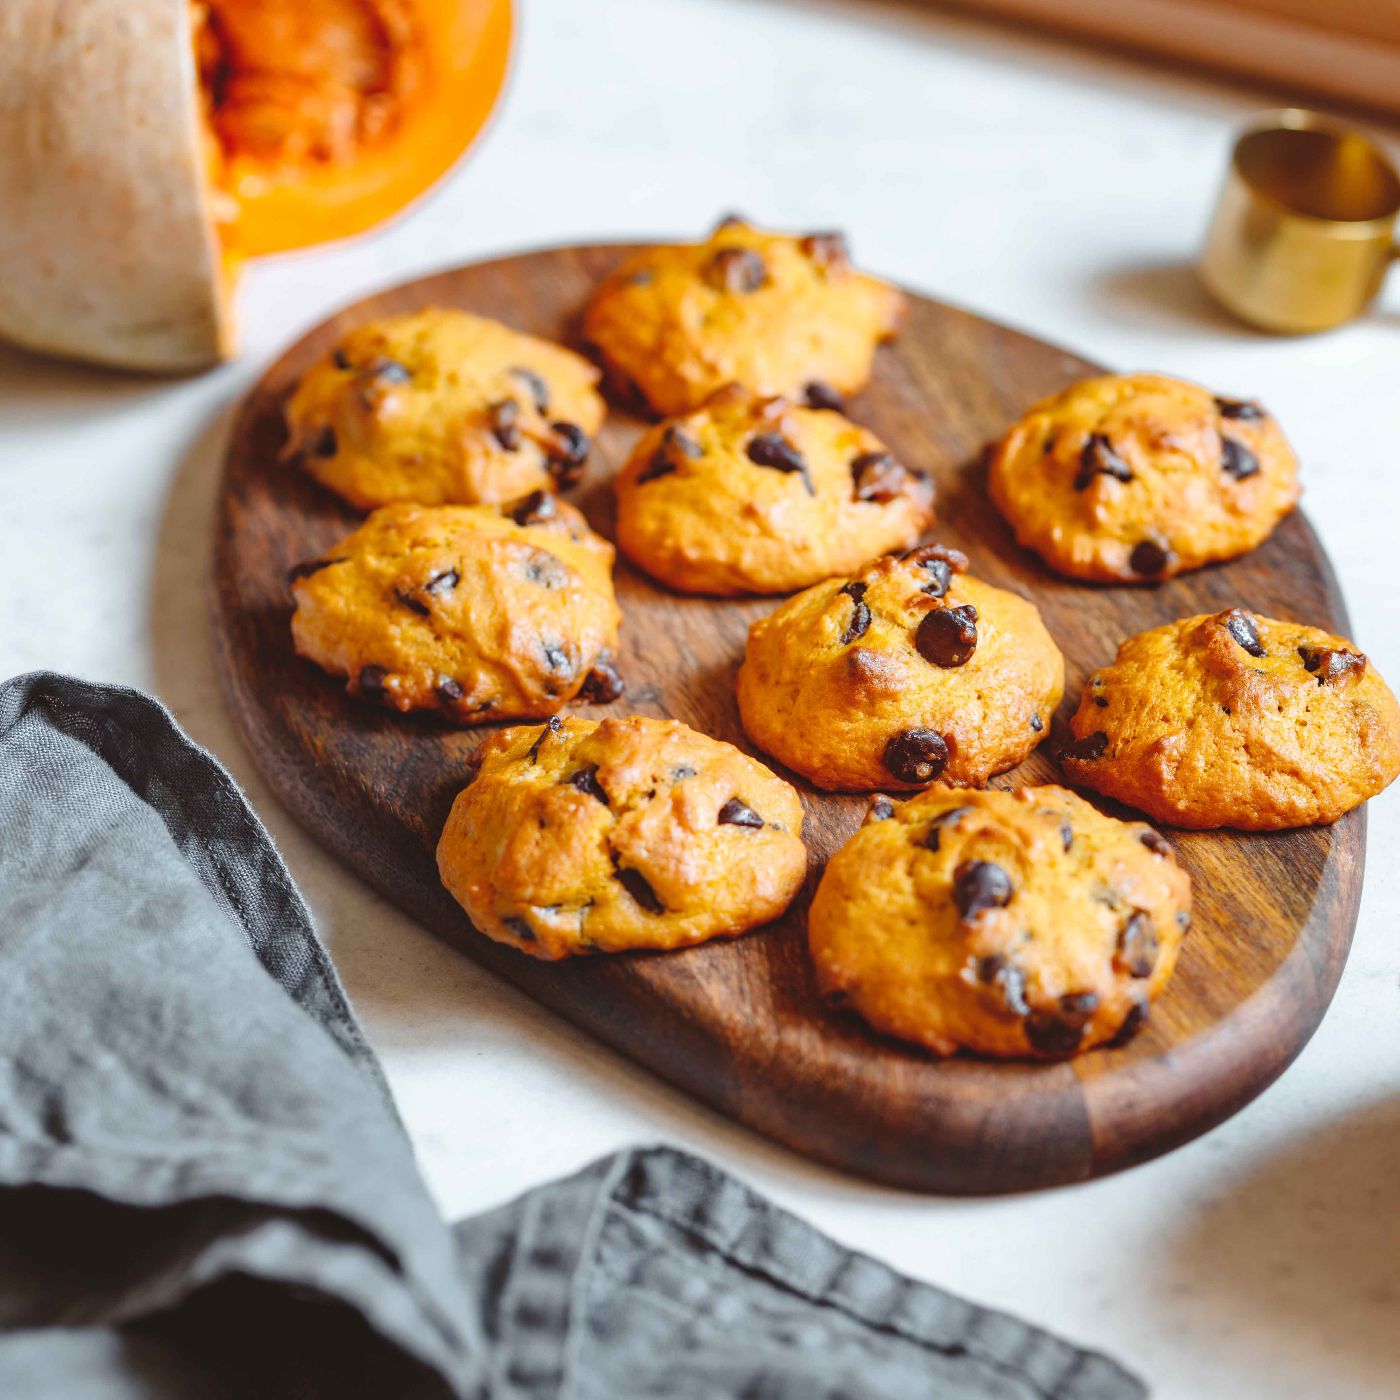 Pumpkin-cookies-with-chocolate-chips-made-from-cake-mix-on-a-wooden-tray.-1161533566_6240x4160_square.jpg